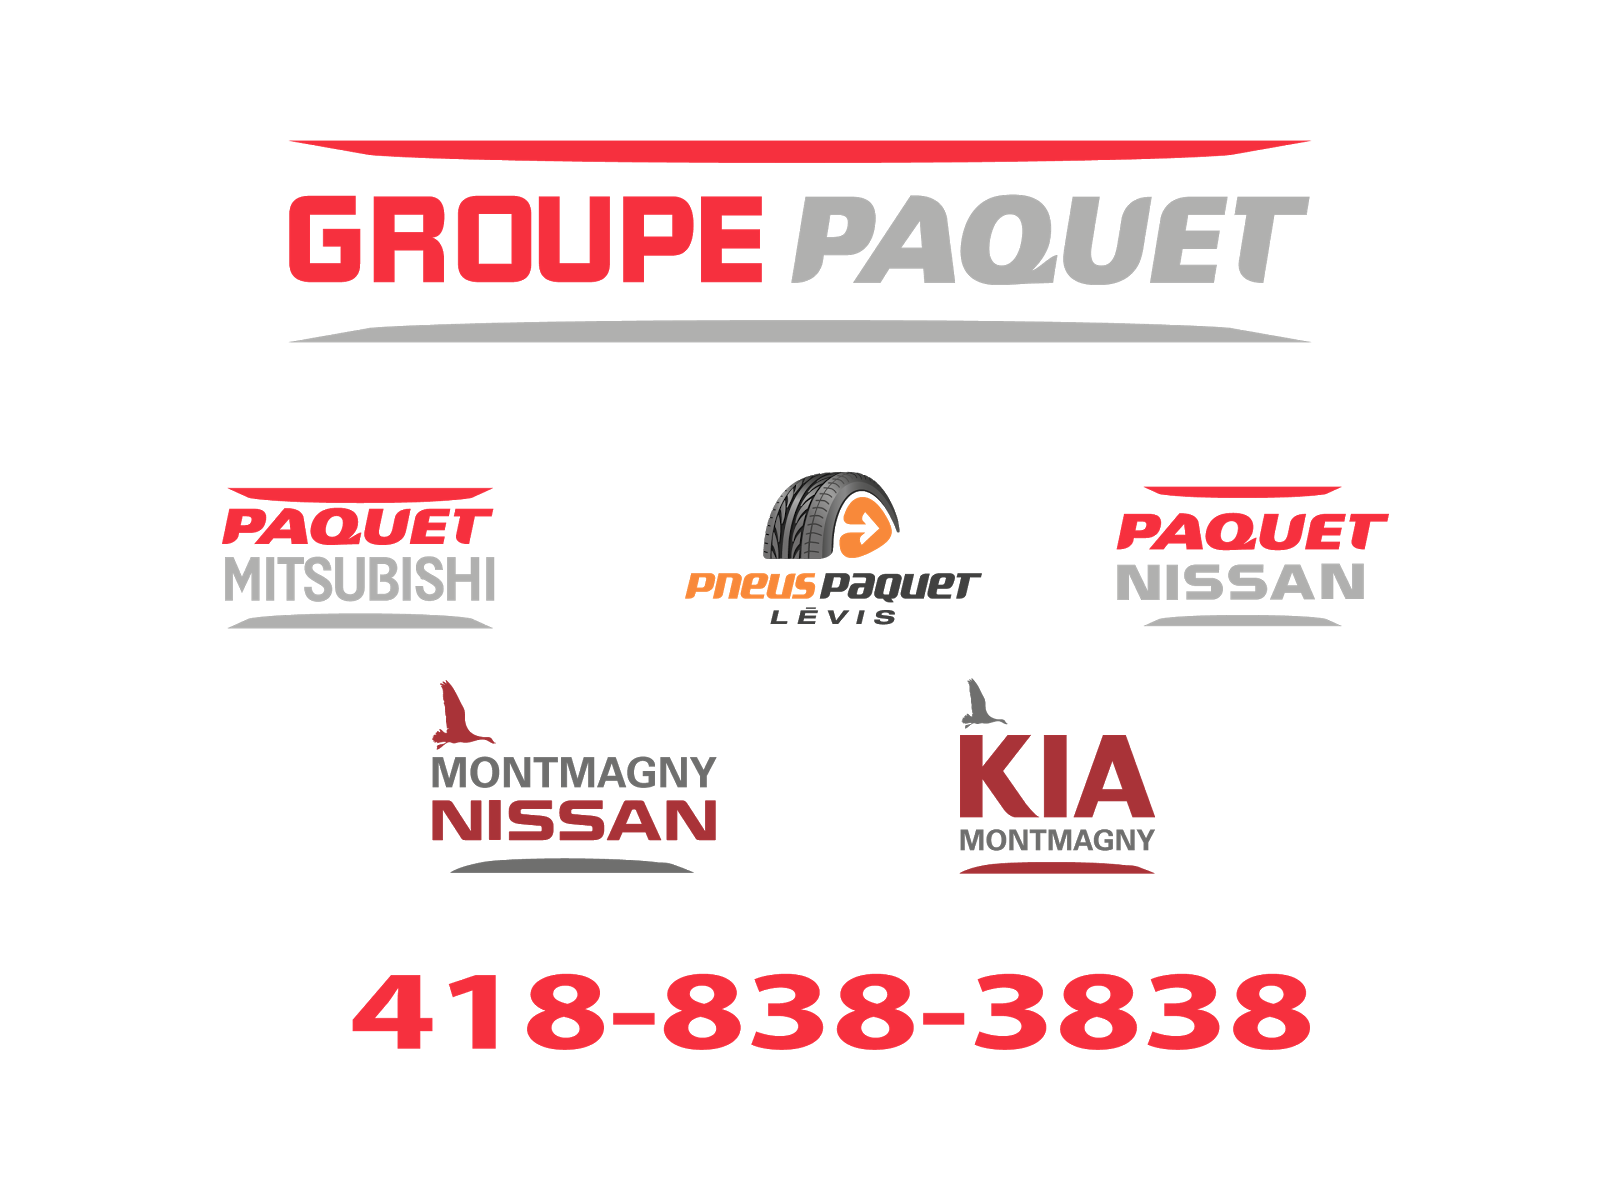 Groupe Paquet